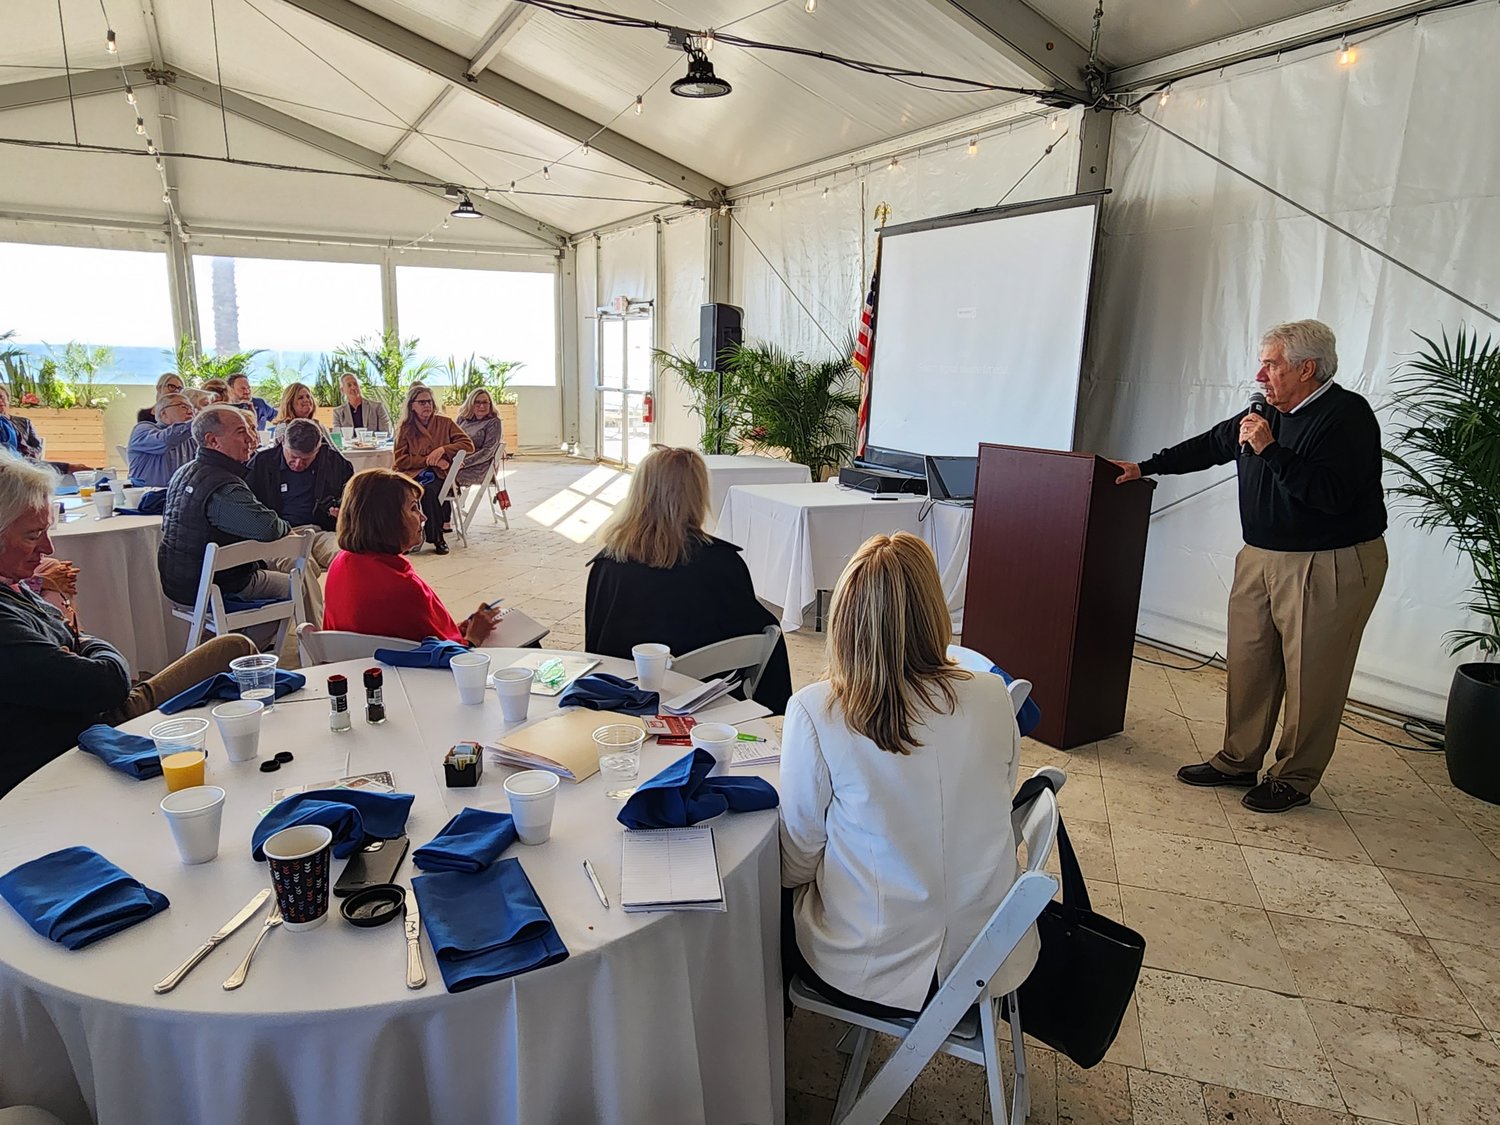 Local realtor Jake Piatt spoke about his experience as a pilot during the Vietnam War as guest speaker at the NEFAR quarterly breakfast at The Plantation Beach House March 14.